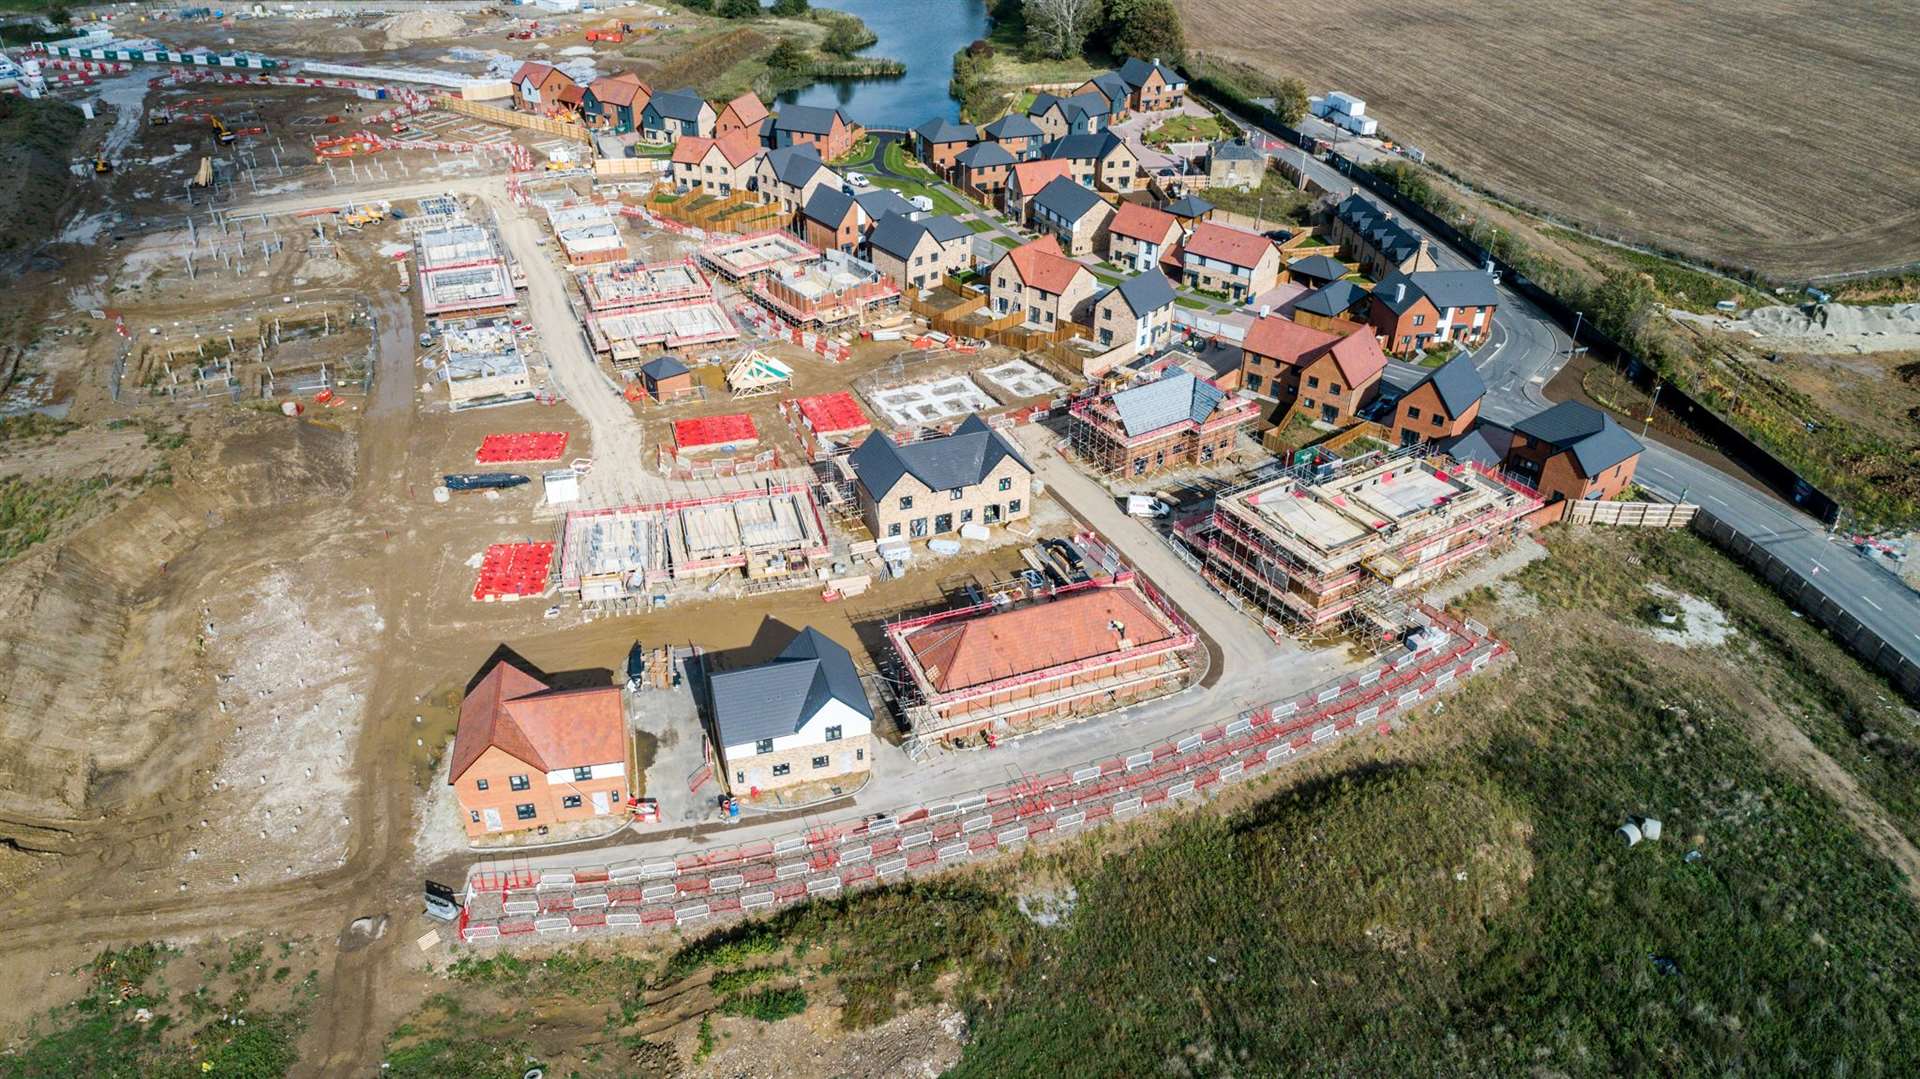 The Faversham Lakes development is located at the Oare Gravel Works in north Faversham